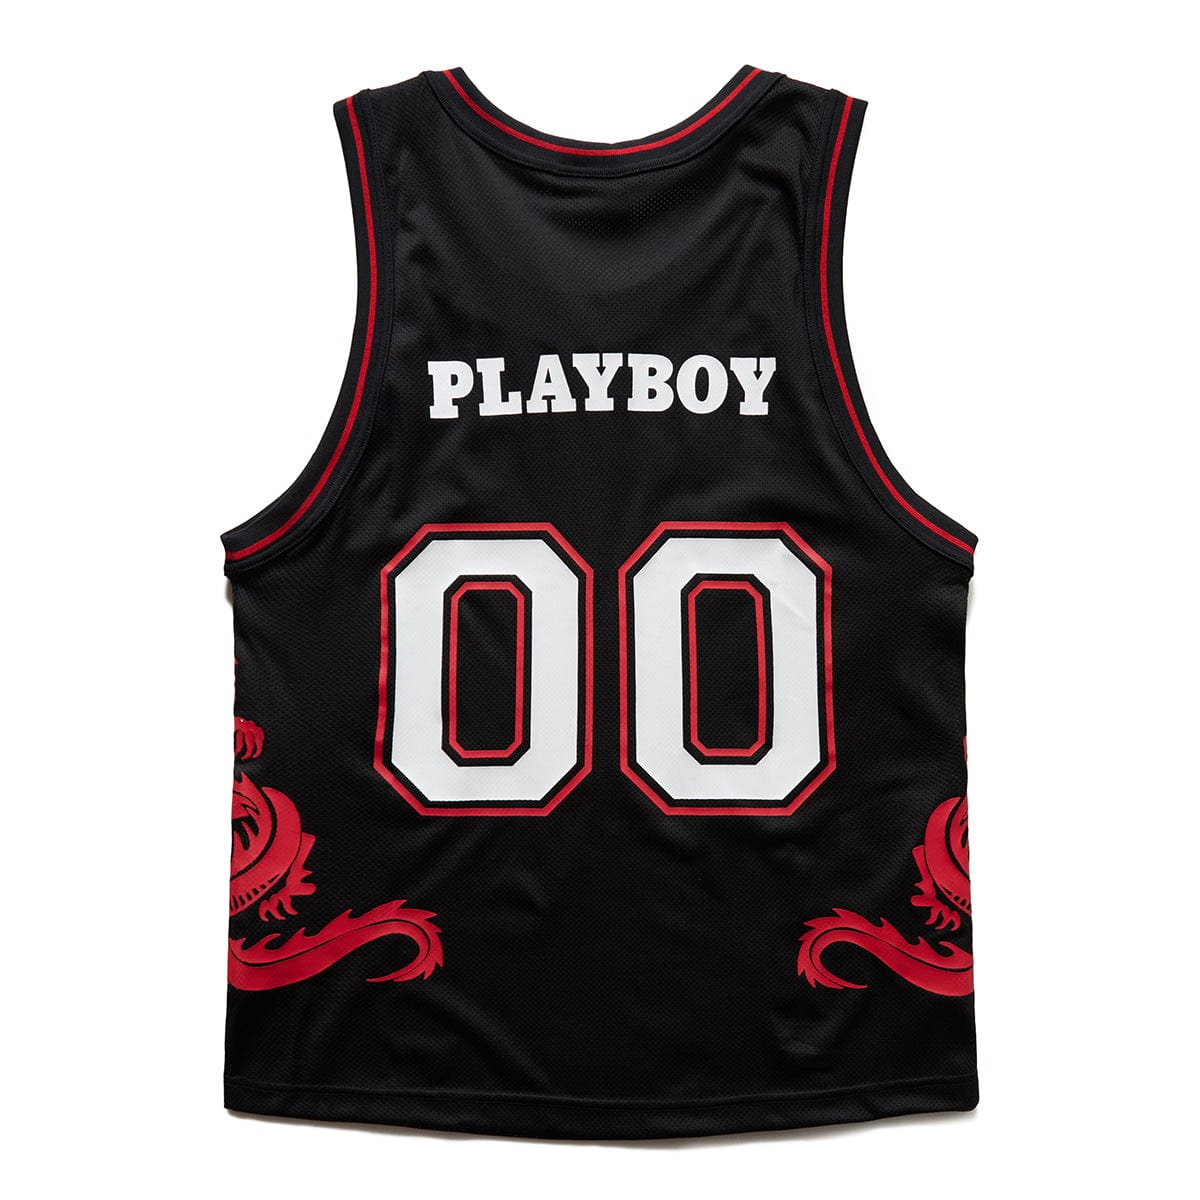 Pleasures T-Shirts X PLAYBOY TAILS BASKETBALL JERSEY